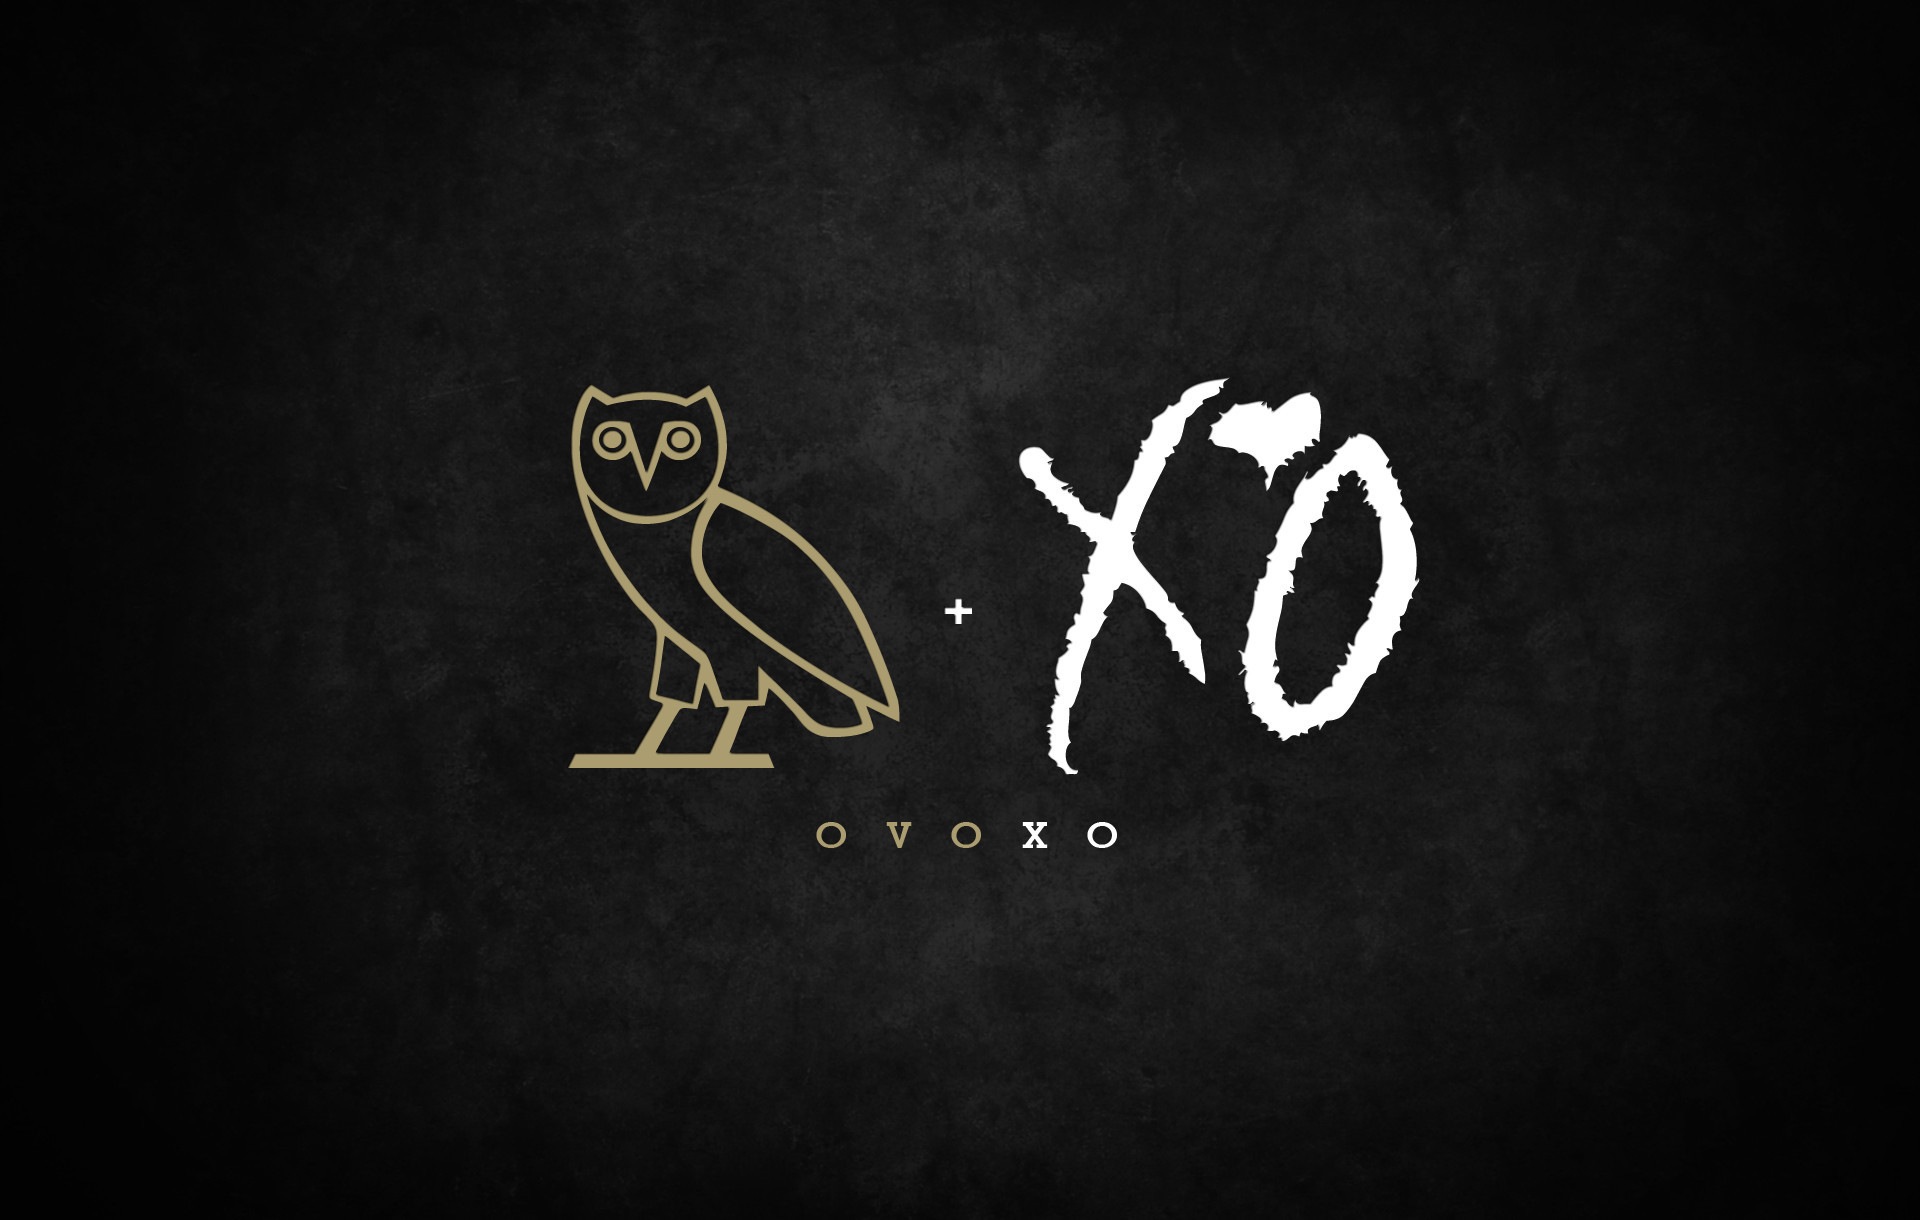 1920x1220 OVO | OVOXO Wallpapers - Page 16 Â« Kanye West Forum